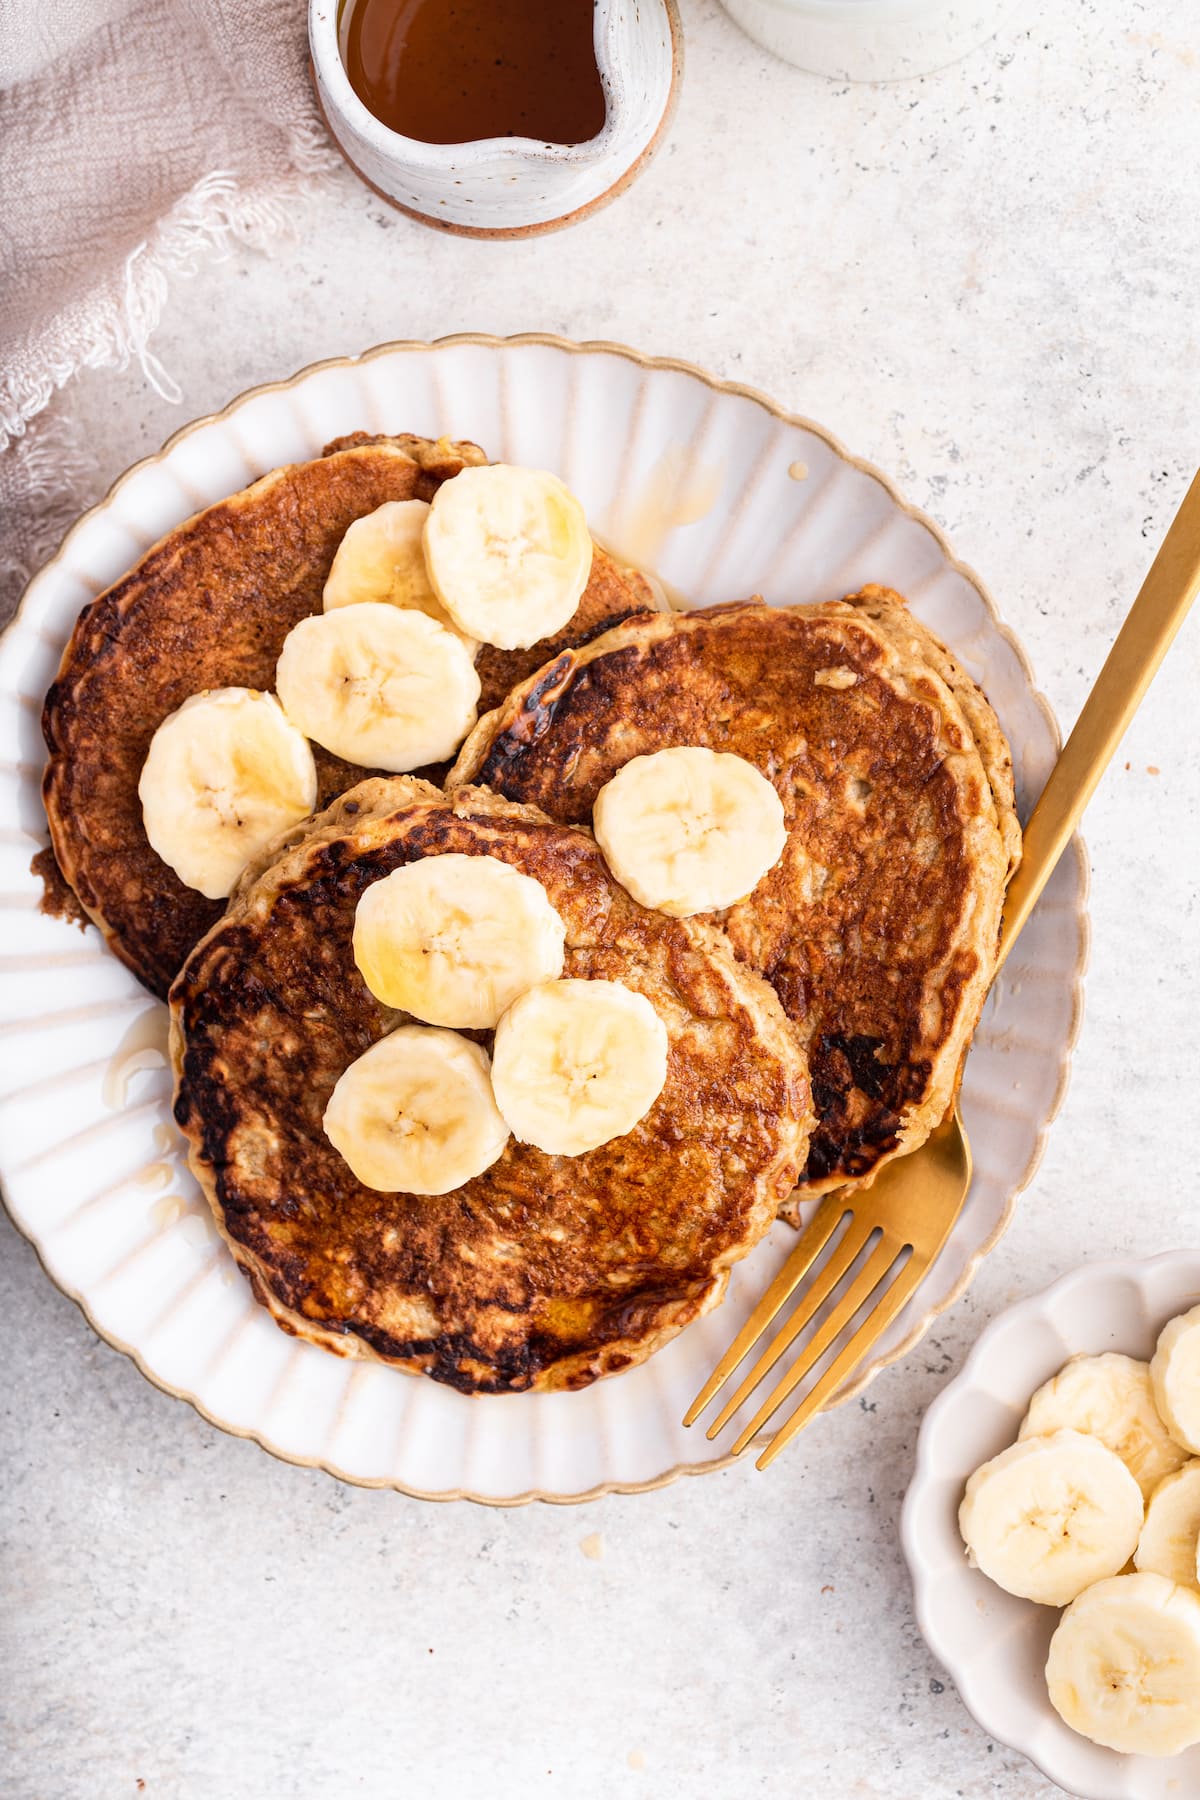 Three overnight oatmeal pancakes topped with banana slices and maple syrup on a plate with a fork.